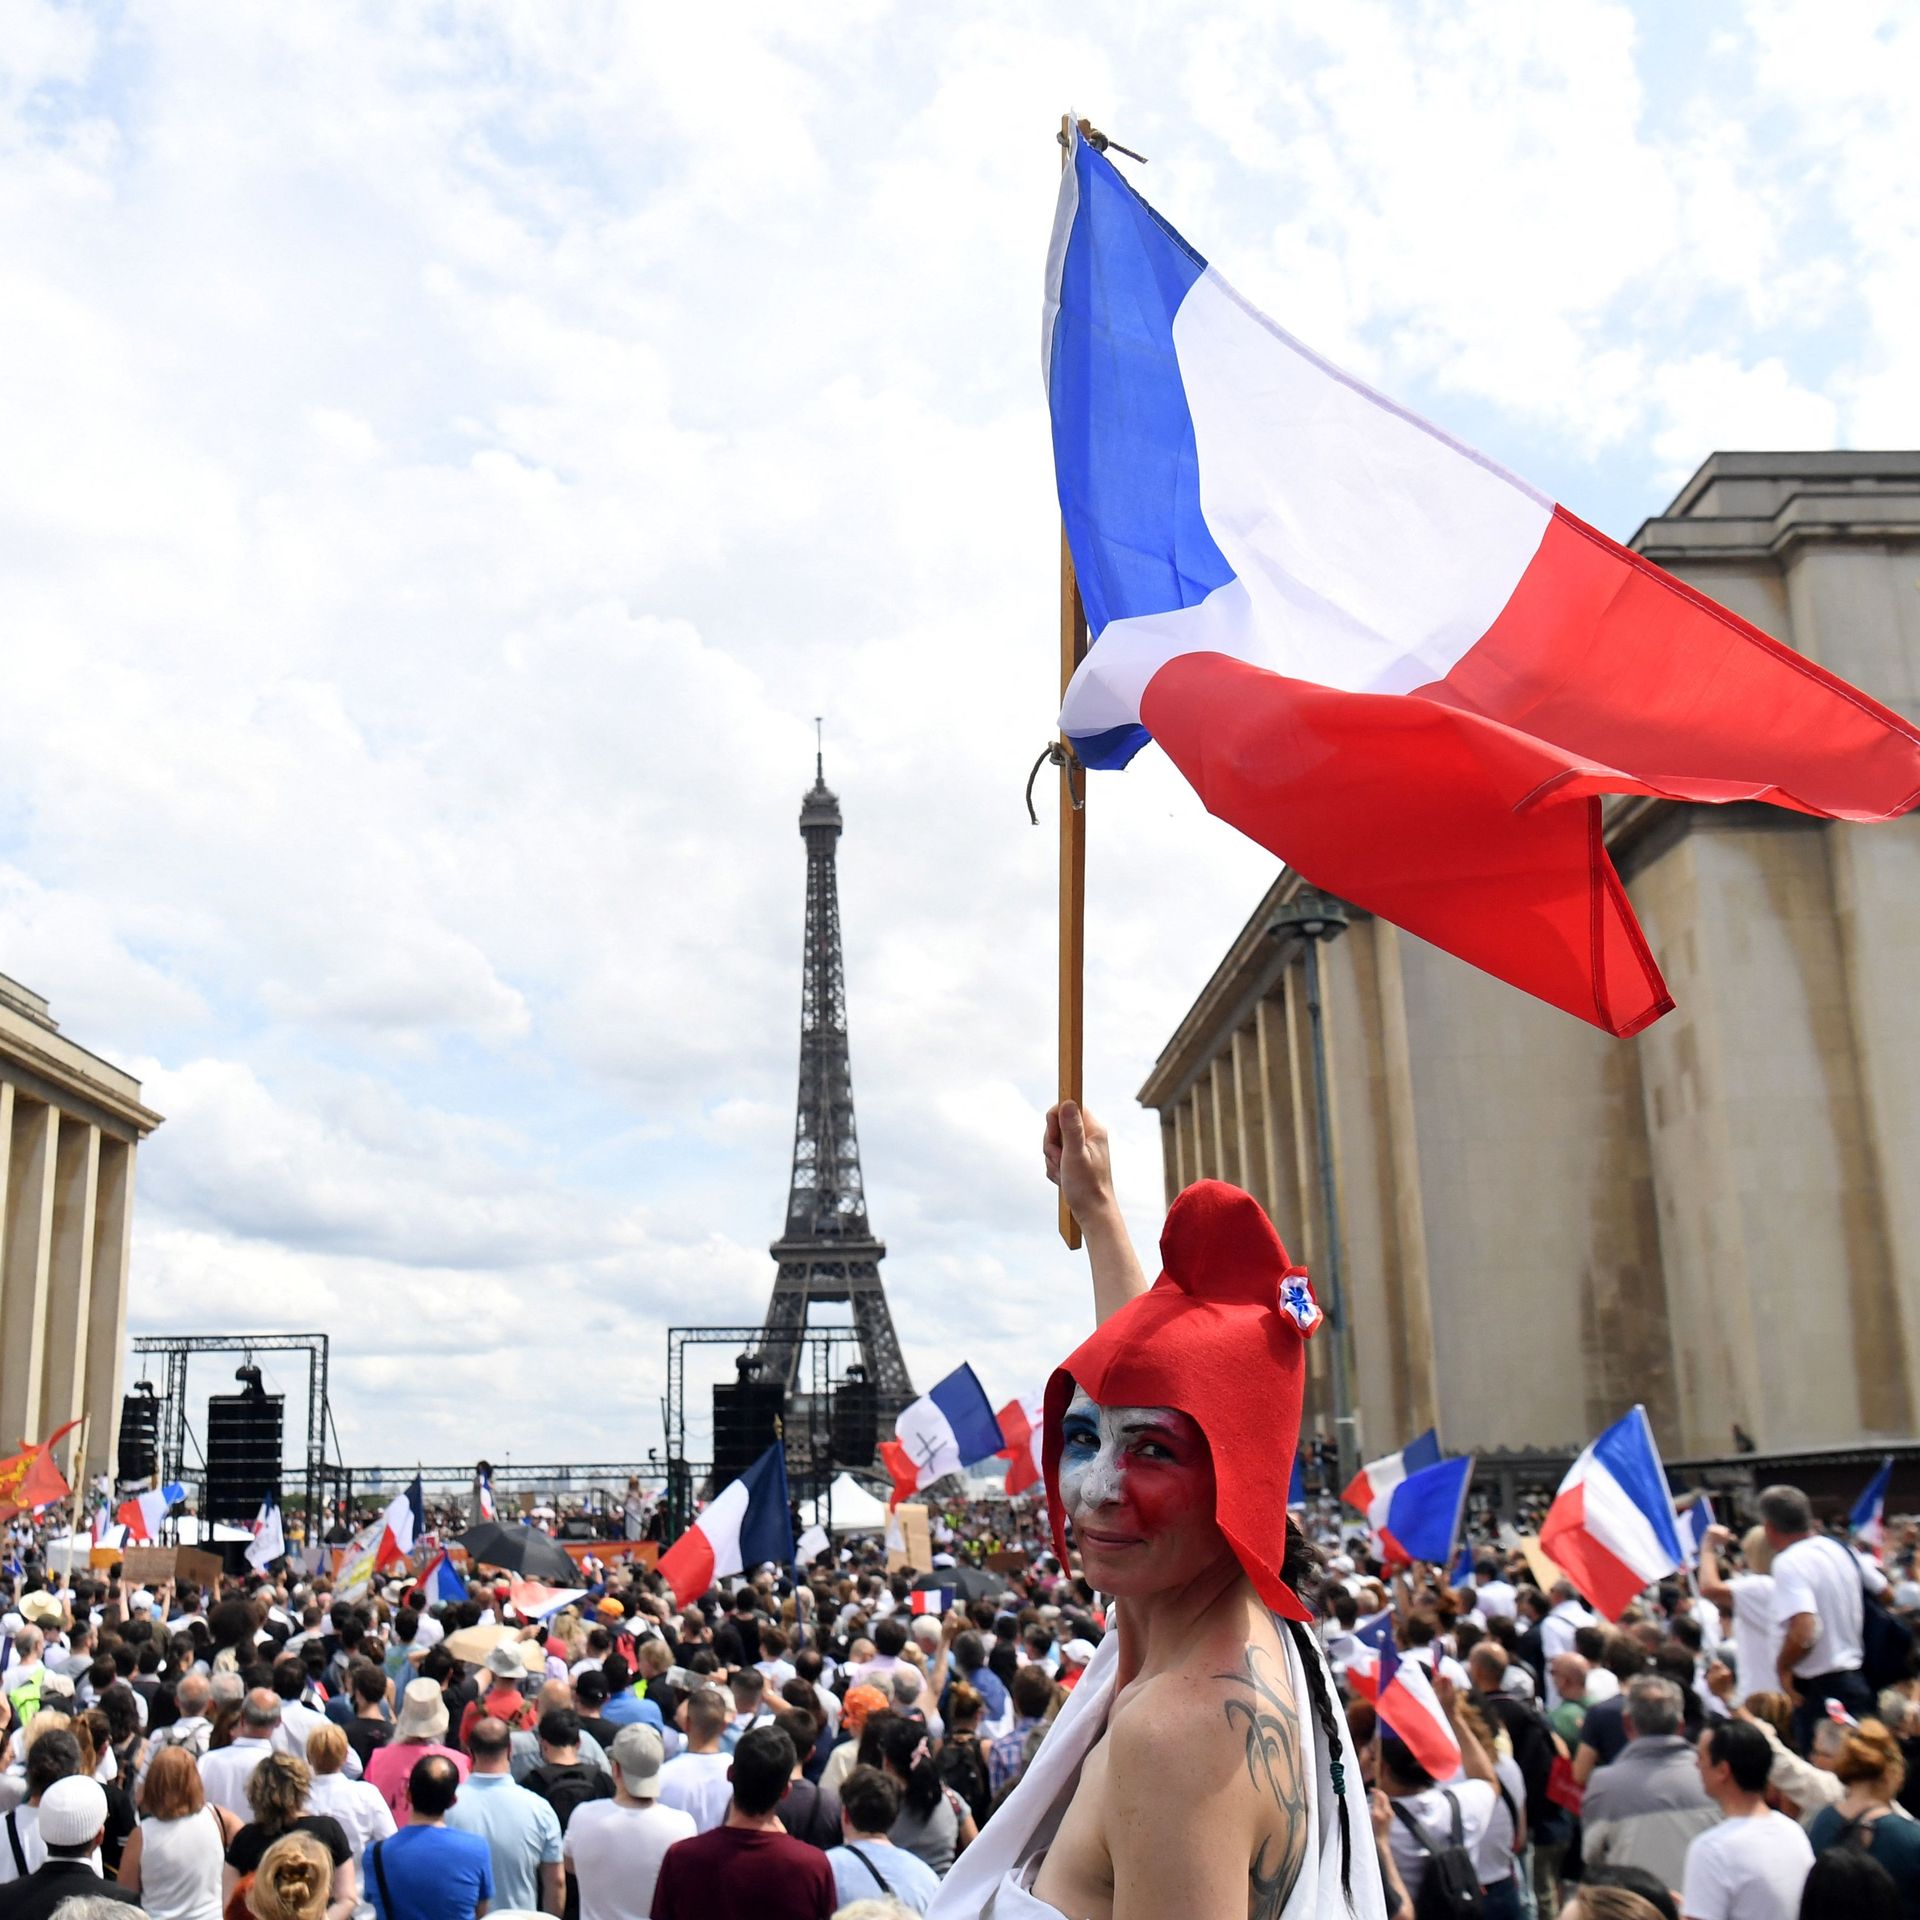 Protesters demonstrating against the compulsory vaccination for certain workers and the mandatory use of the health pass called by the French government in Paris on July 21